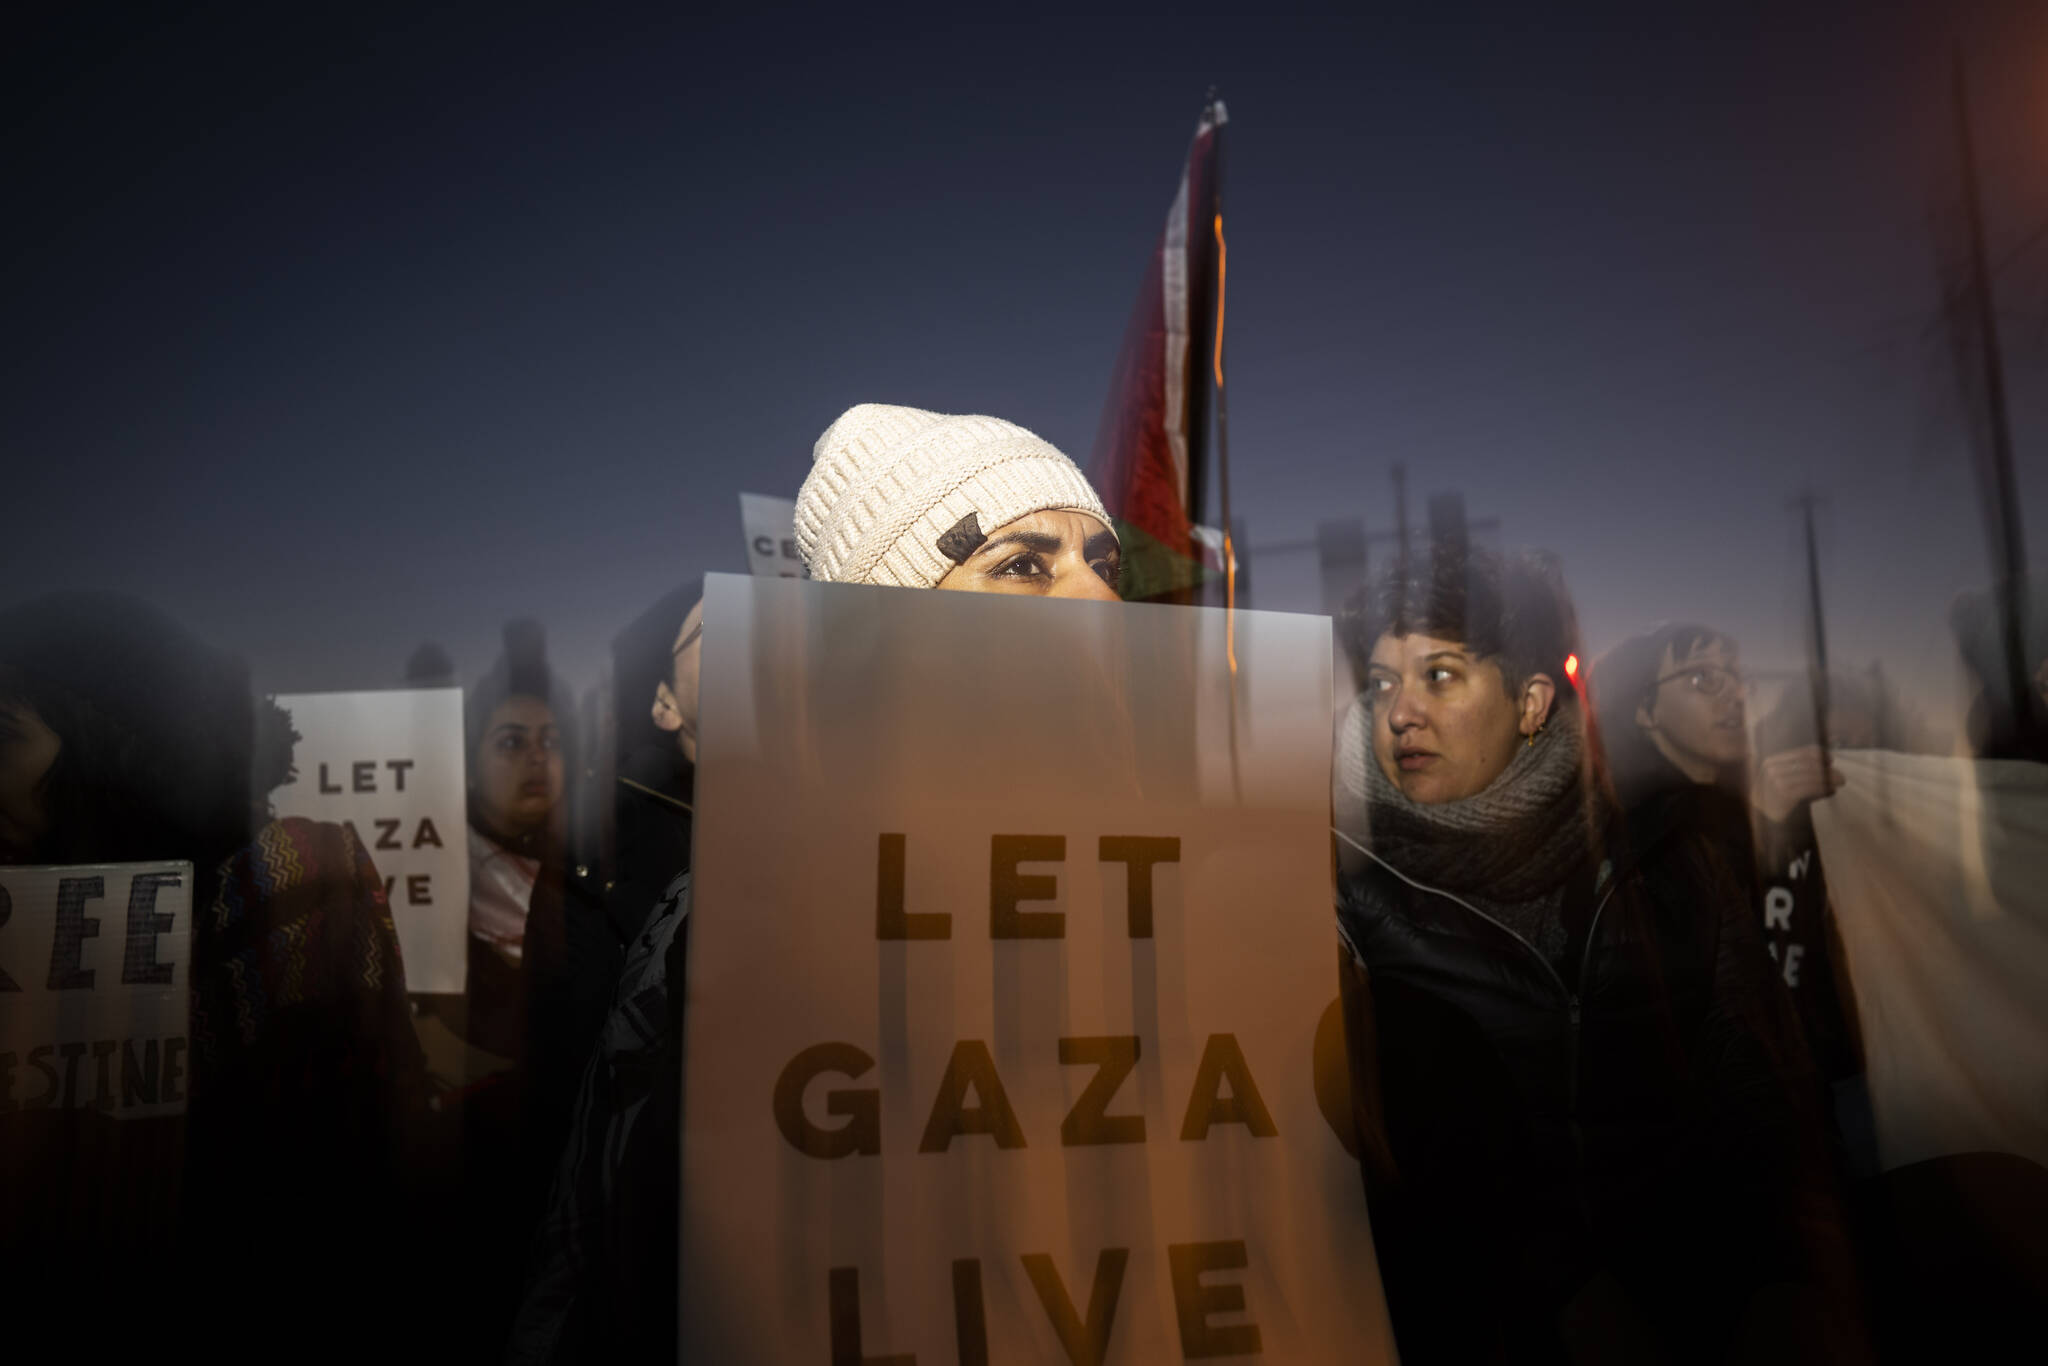 Demonstrators shut down the Spring Garden Street Bridge during a Pro-Palestinian rally on Thursday in Philadelphia. More than 200 people gathered to call for a ceasefire in Gaza. (AP Photo/Joe Lamberti)